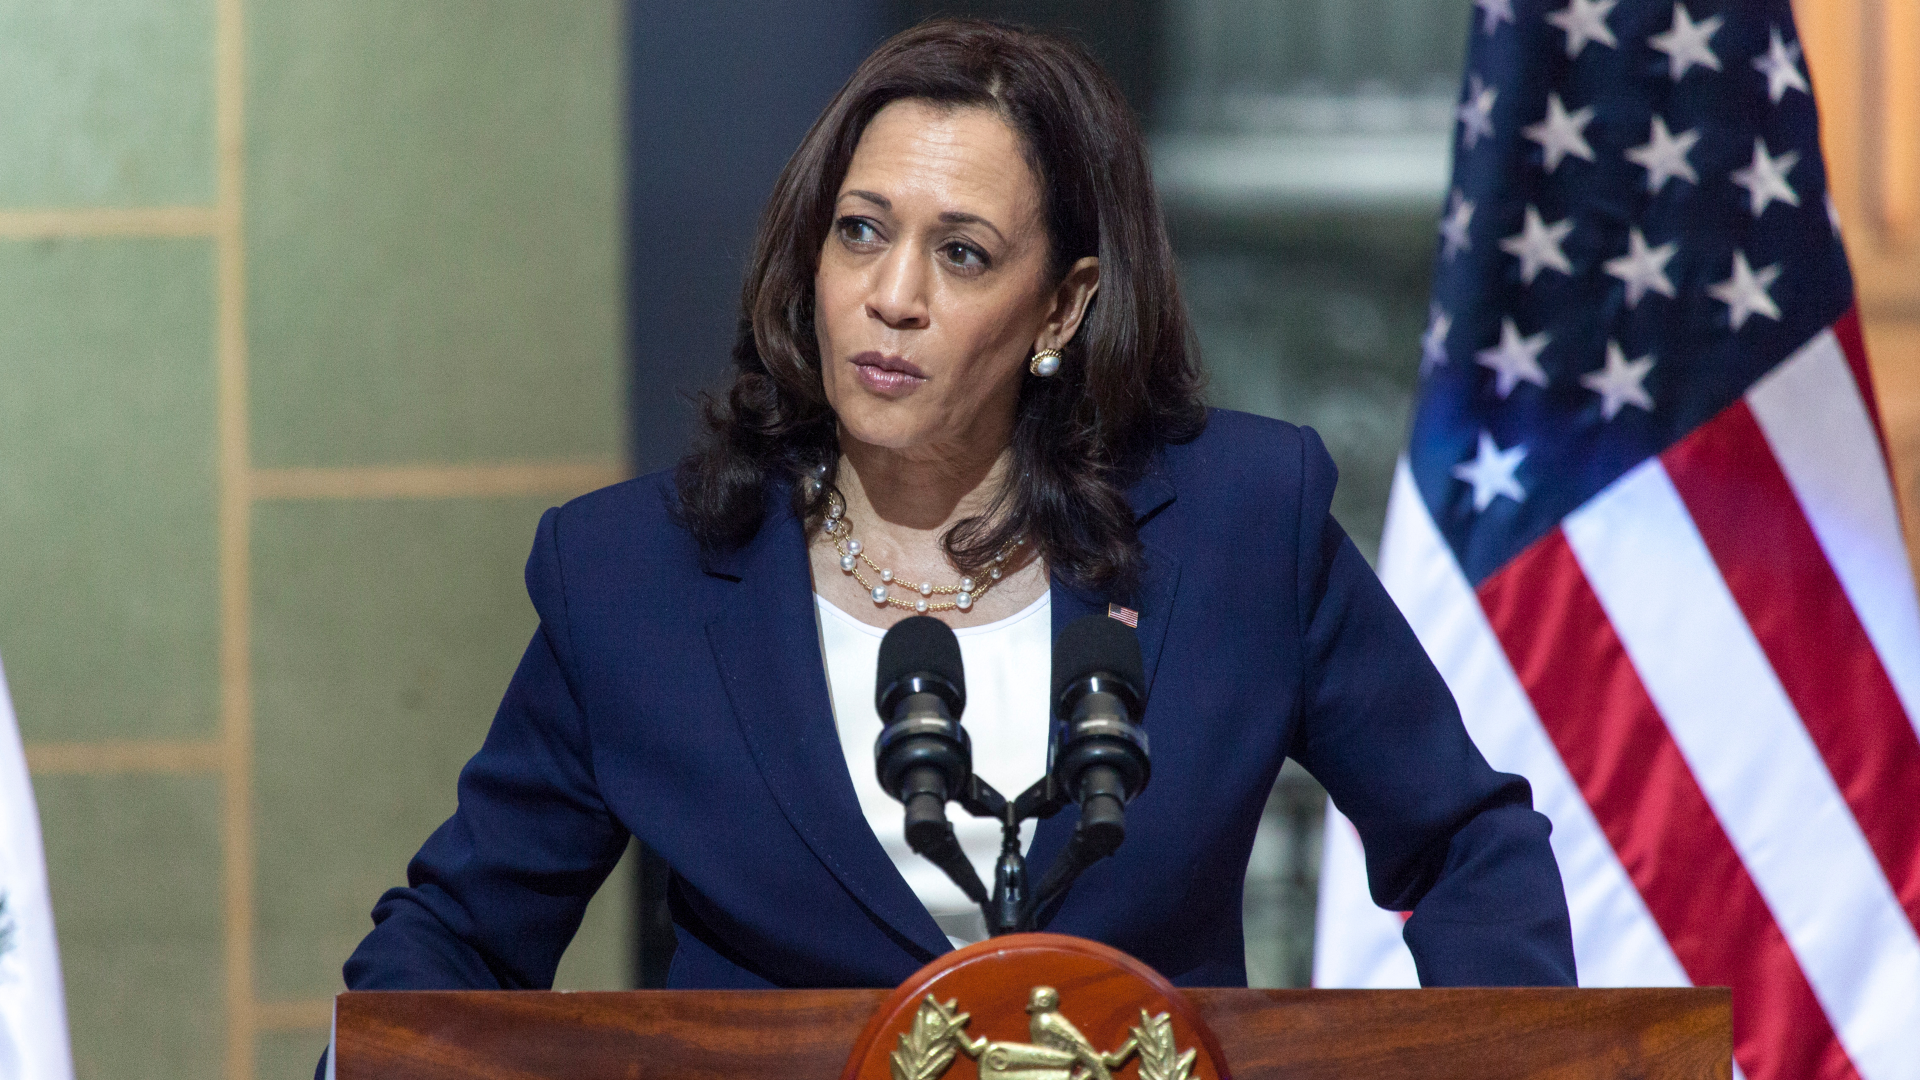 Olive Branch From Kamala Harris to Crypto Is 'A Tad Late', Says Bernstein